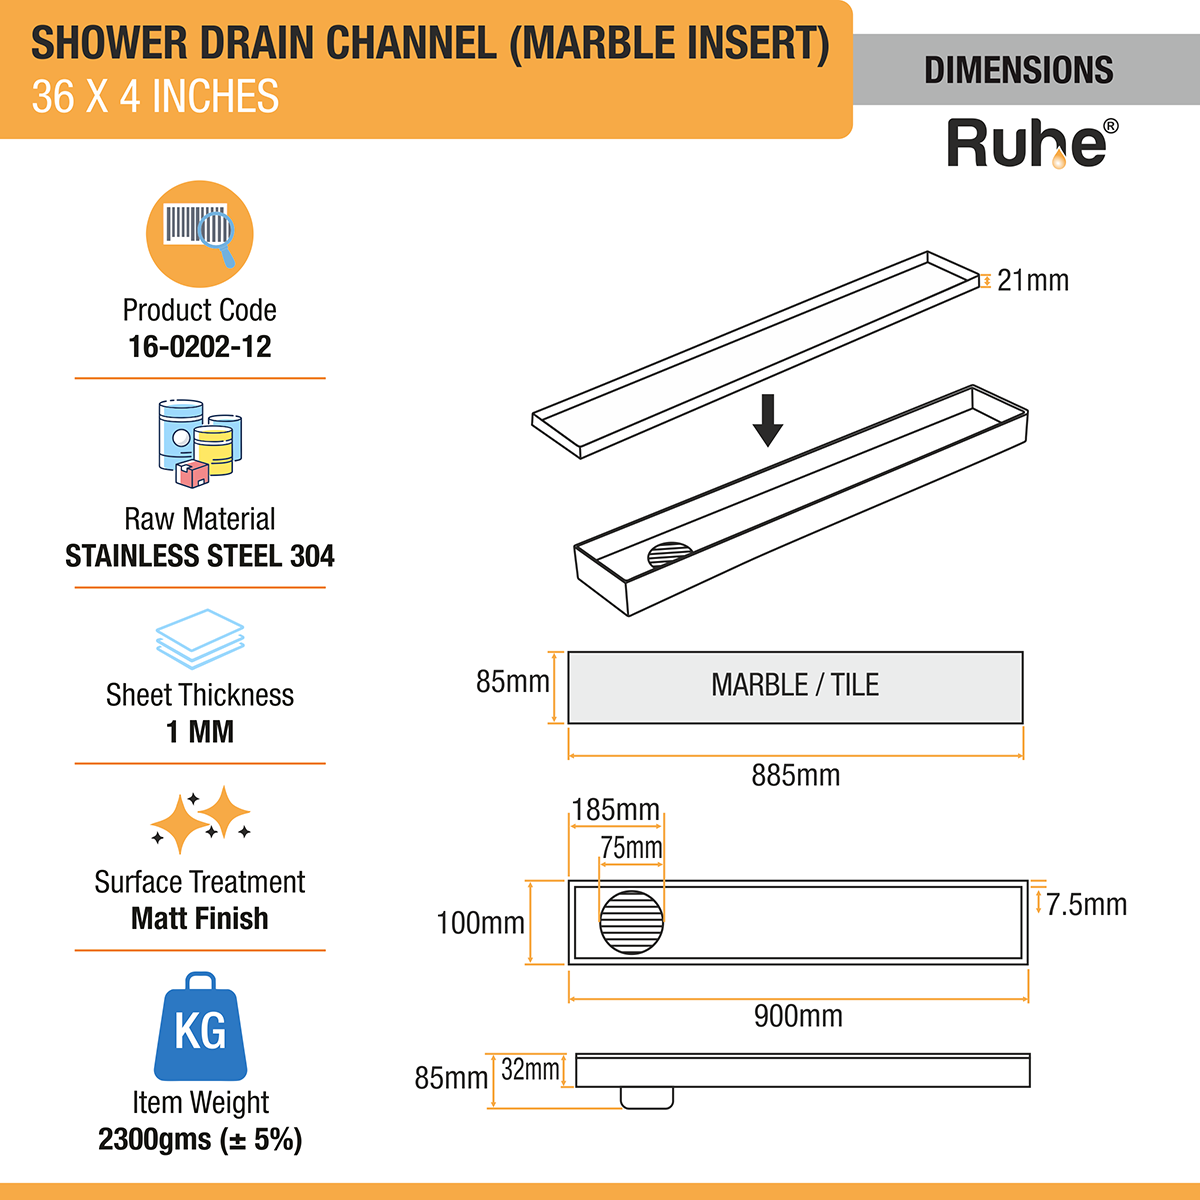 Marble Insert Shower Drain Channel (36 x 4 Inches) with Cockroach Trap (304 Grade) dimensions and size